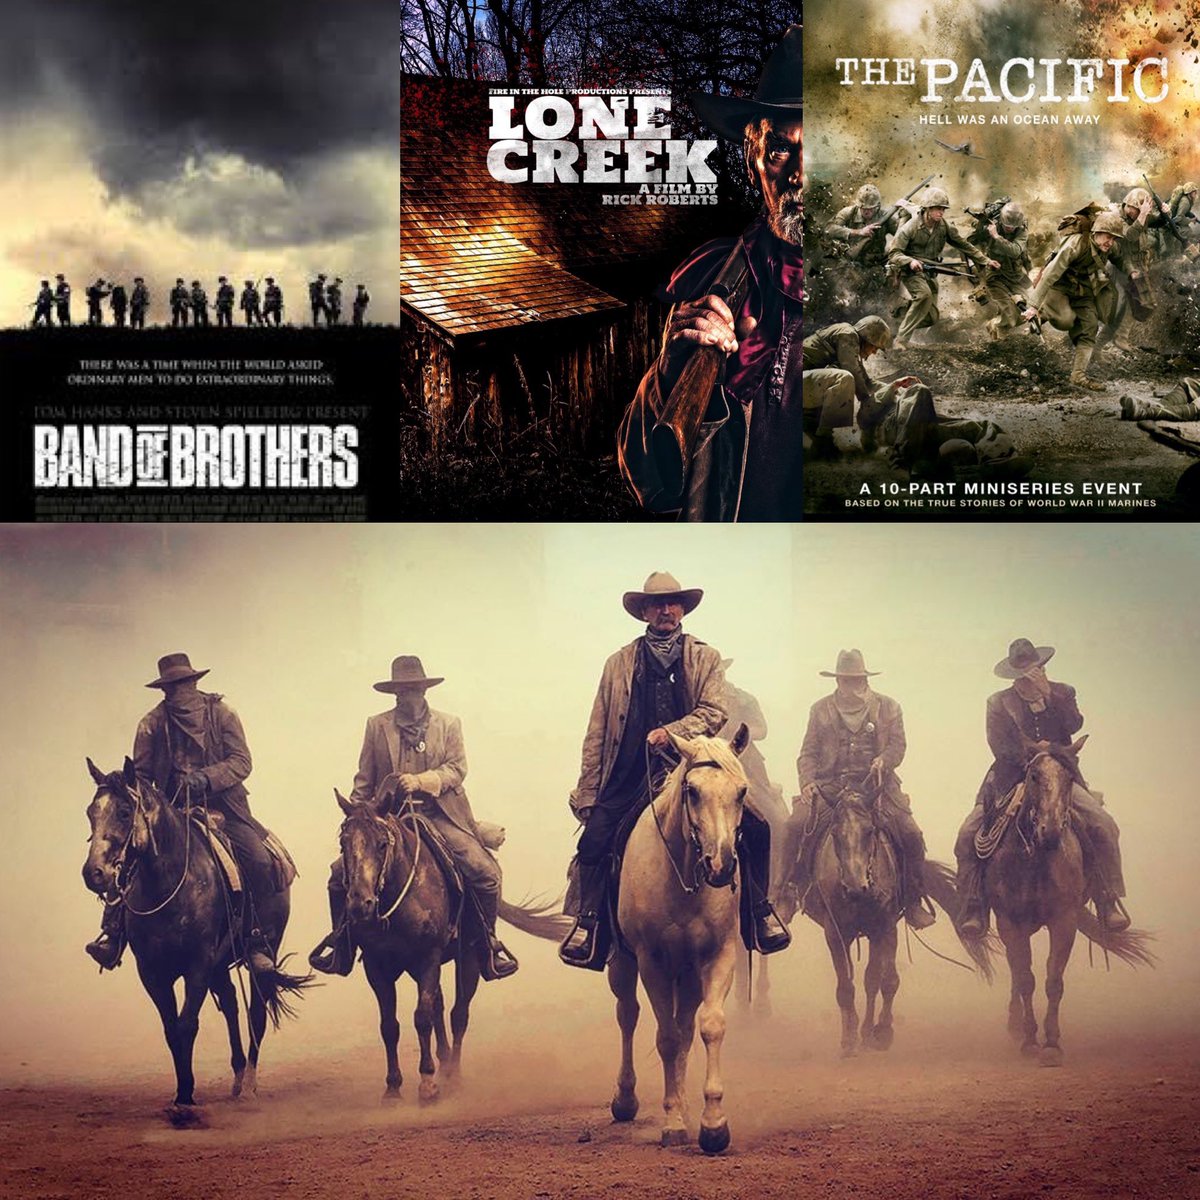 Some amazing talented actors from Band of Brothers & The Pacific in our next western film!😊🎬 #lonecreekfilm #Western #WesternFilm #BandofBrothers #ThePacific #actor #actors #film #HBO #UKFilm #movie #Filmmaking #FilmTwitter #FilmProduction #tvtime #Films #Production #Cast